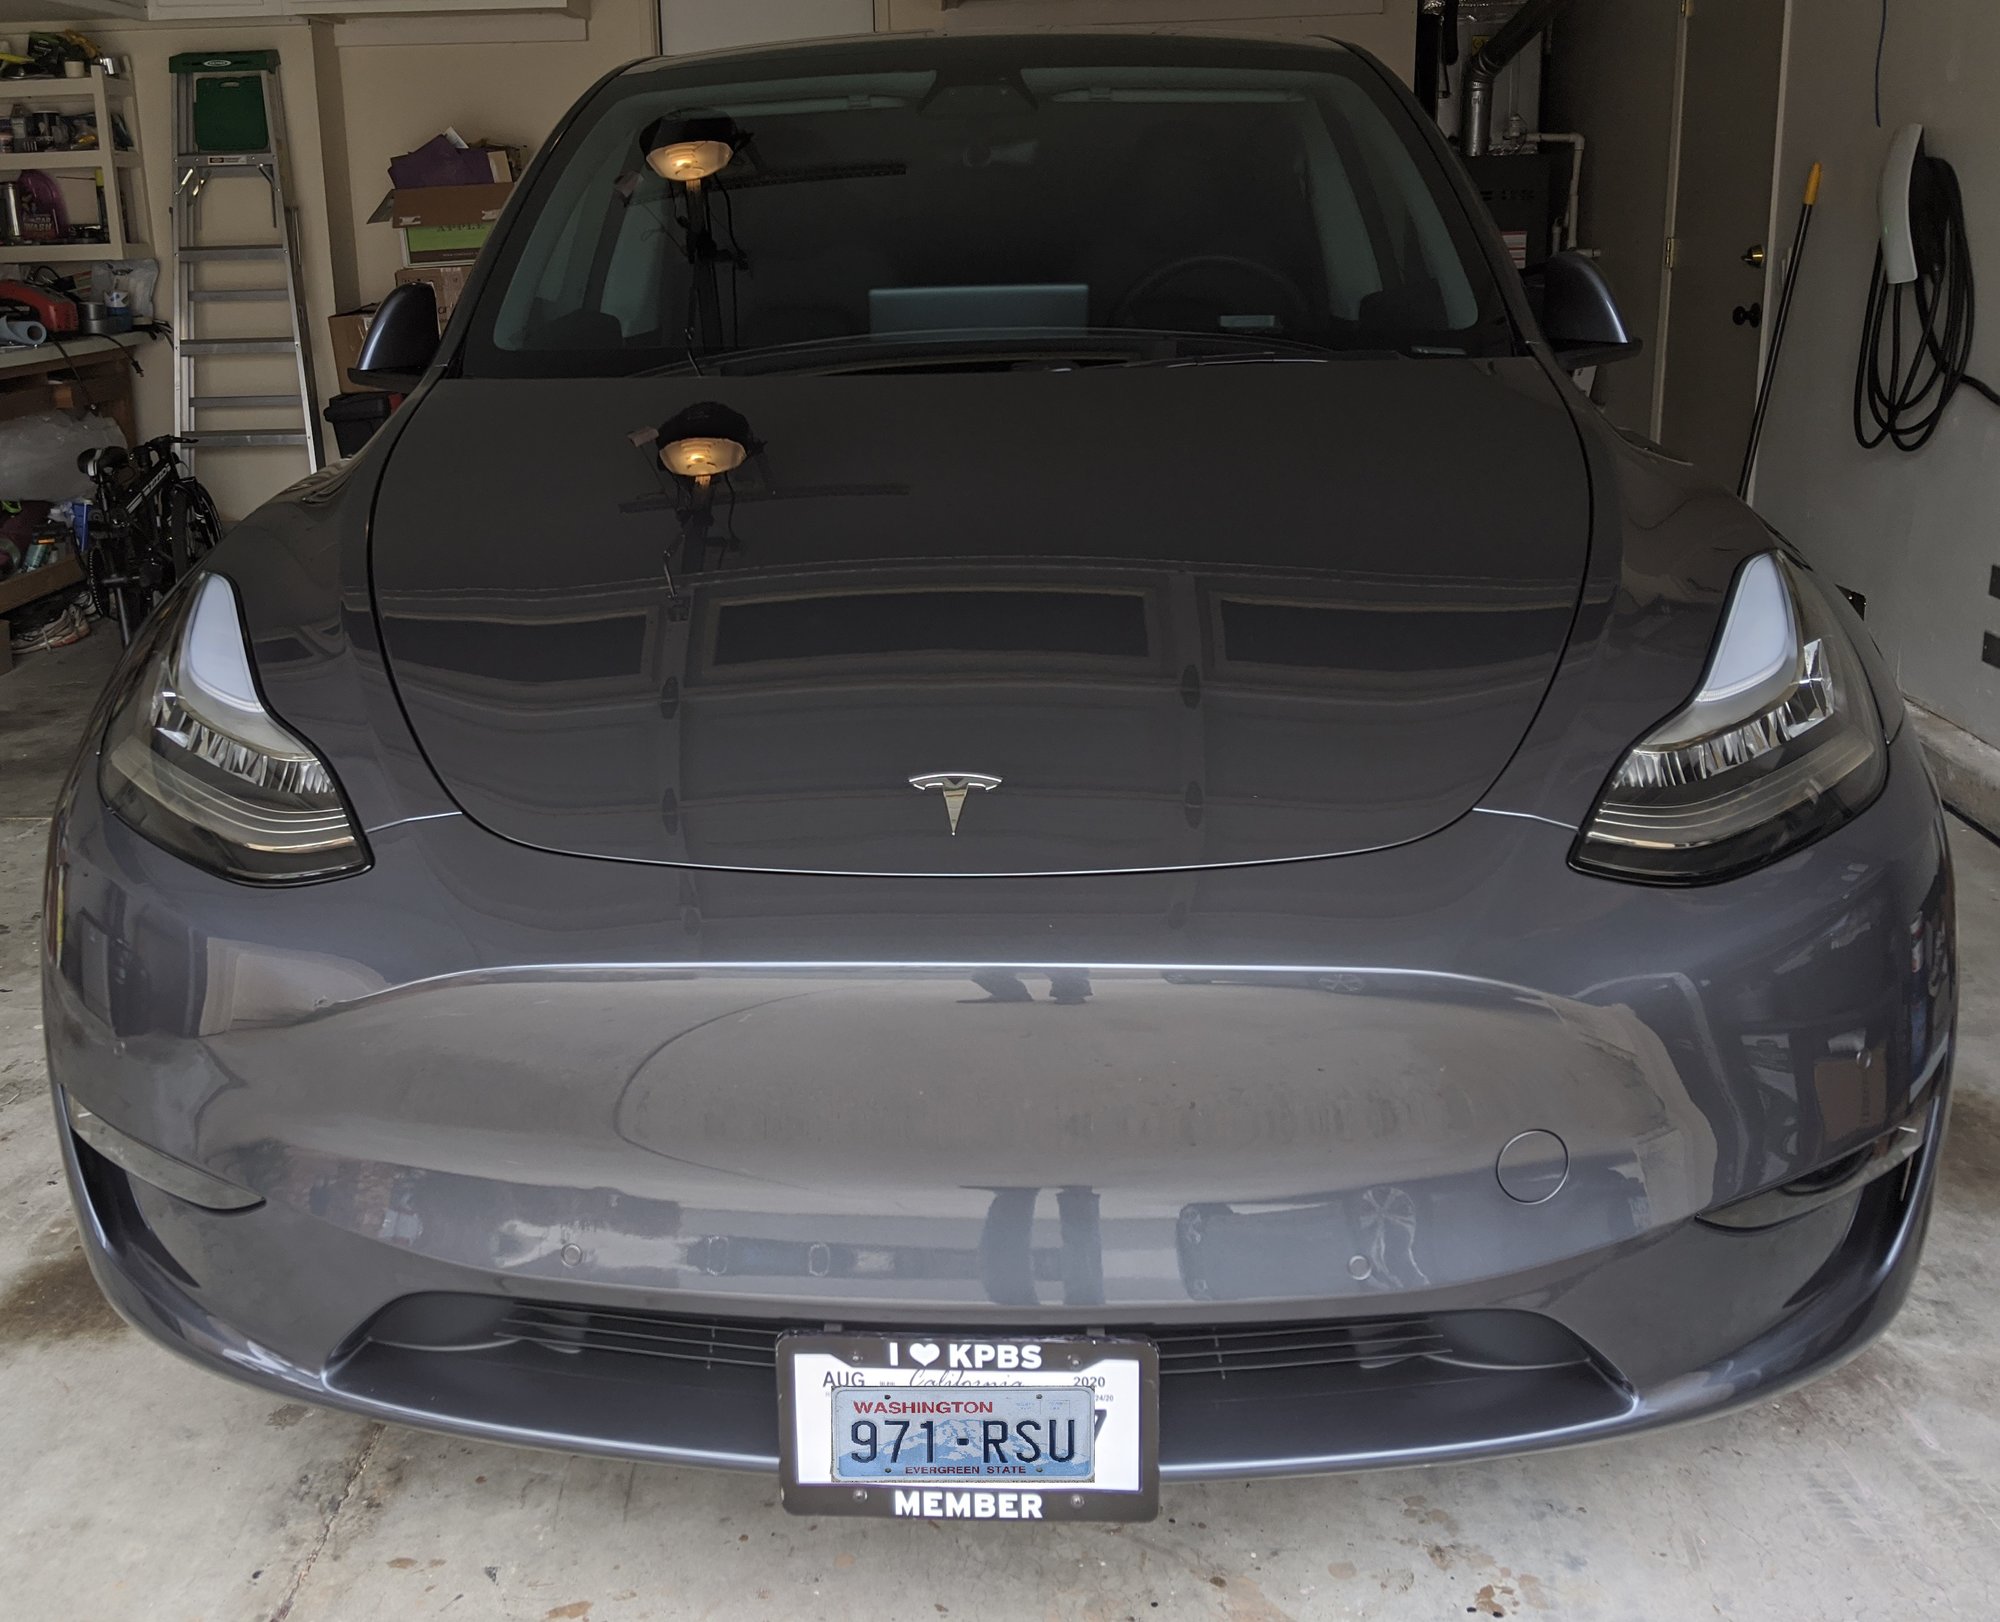 Front License Plate for Model Y